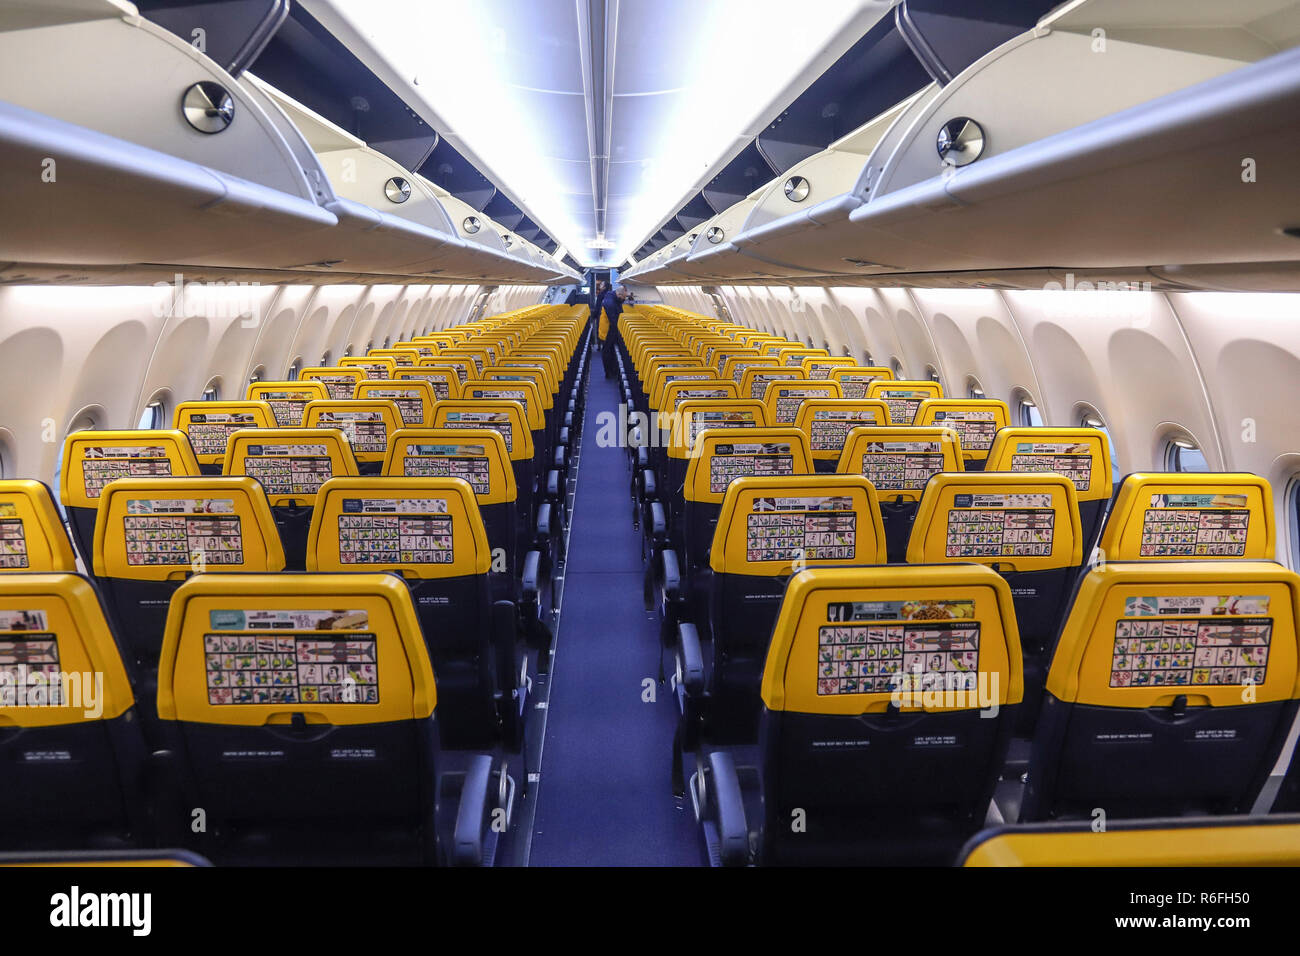 The New Boeing Sky Interior Cabin Of Ryanair The Aircraft